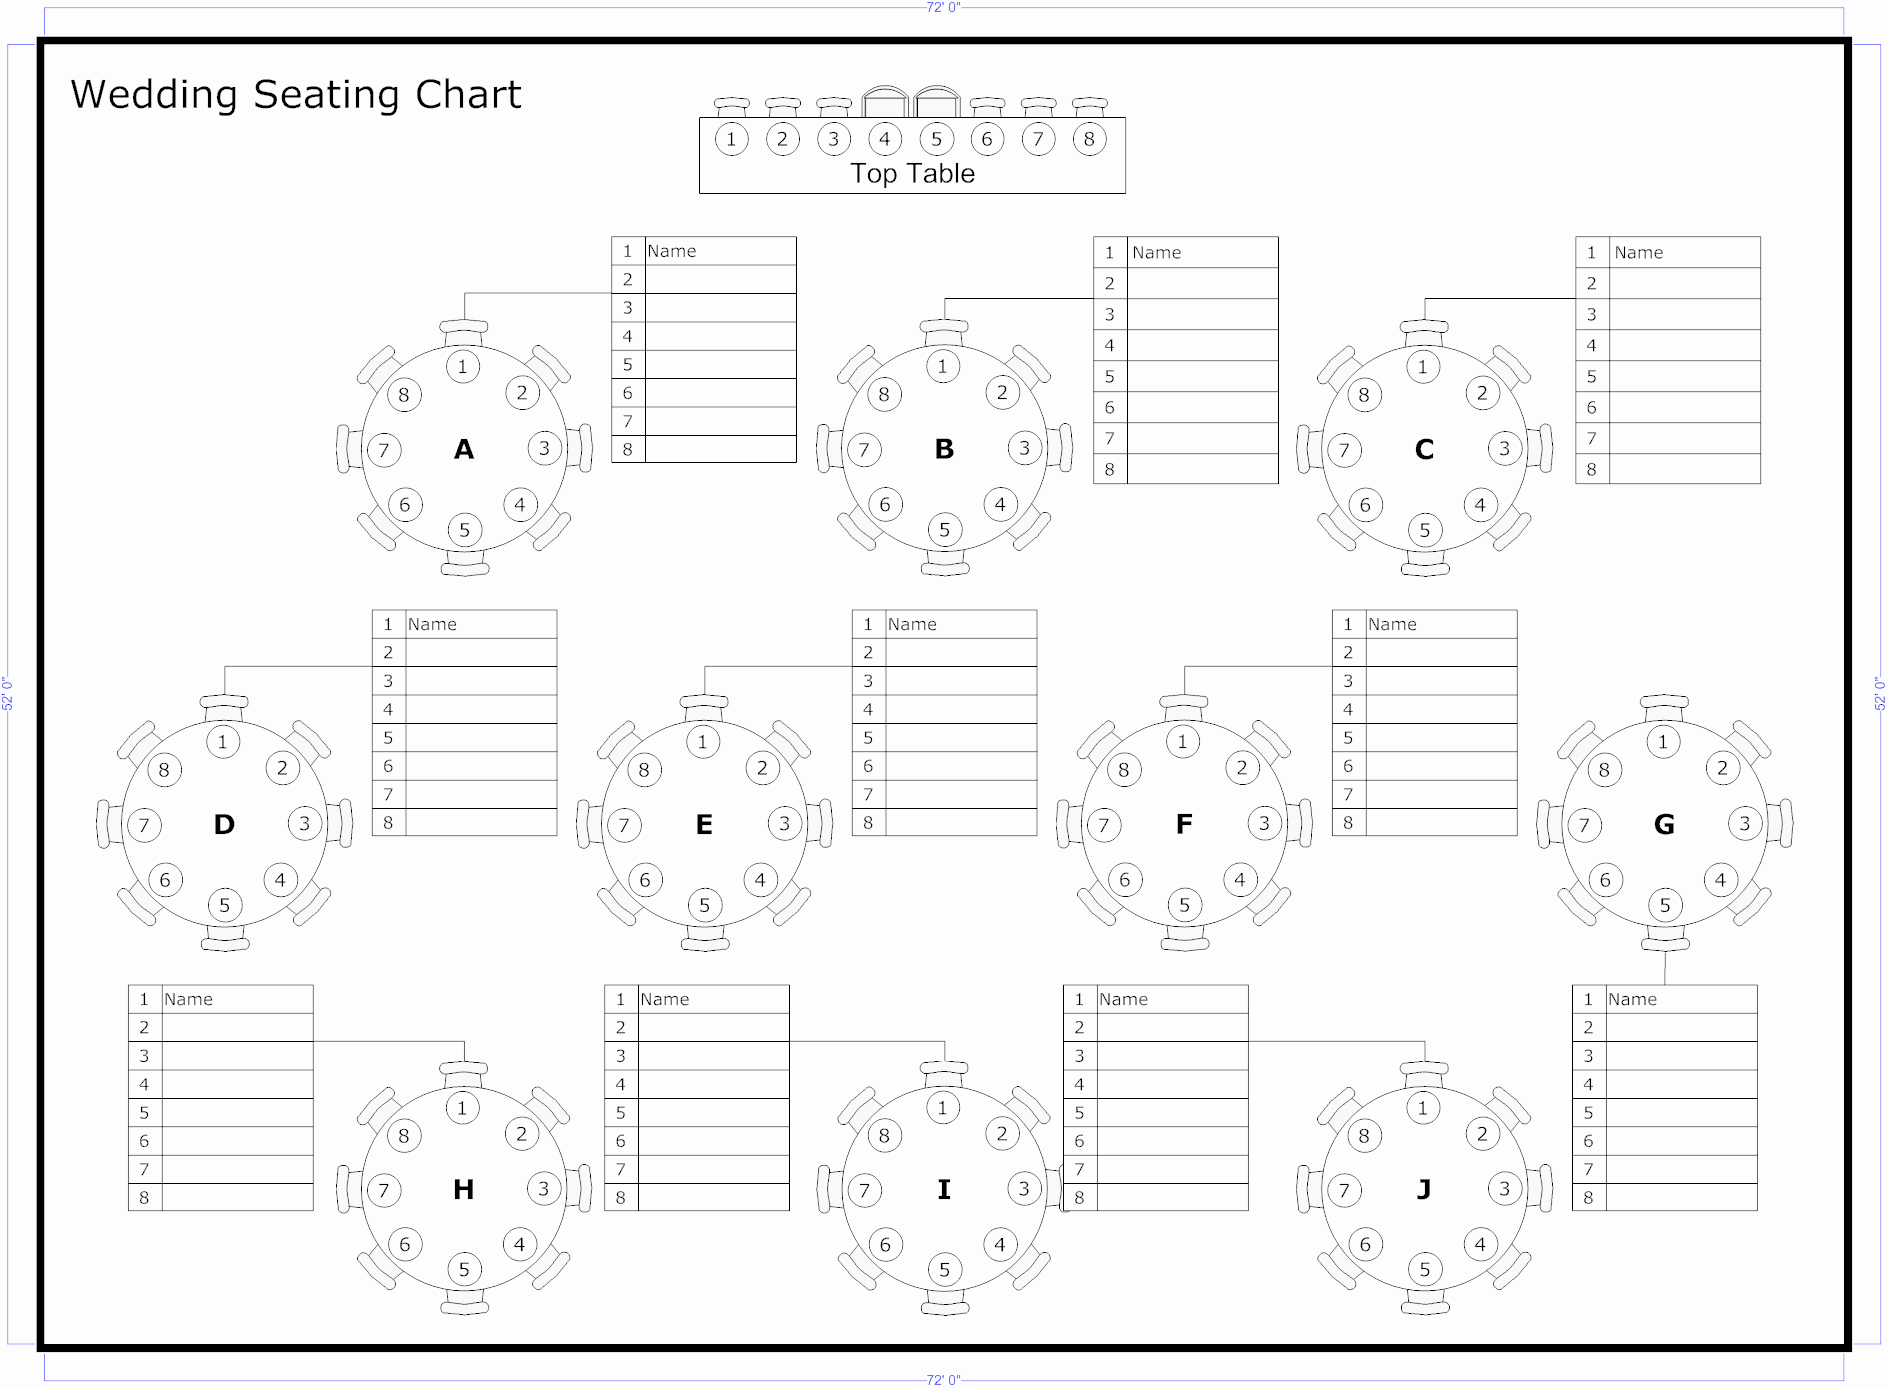 Classroom Seating Chart Template Microsoft Word Unique Tips to Seat Your Wedding Guests